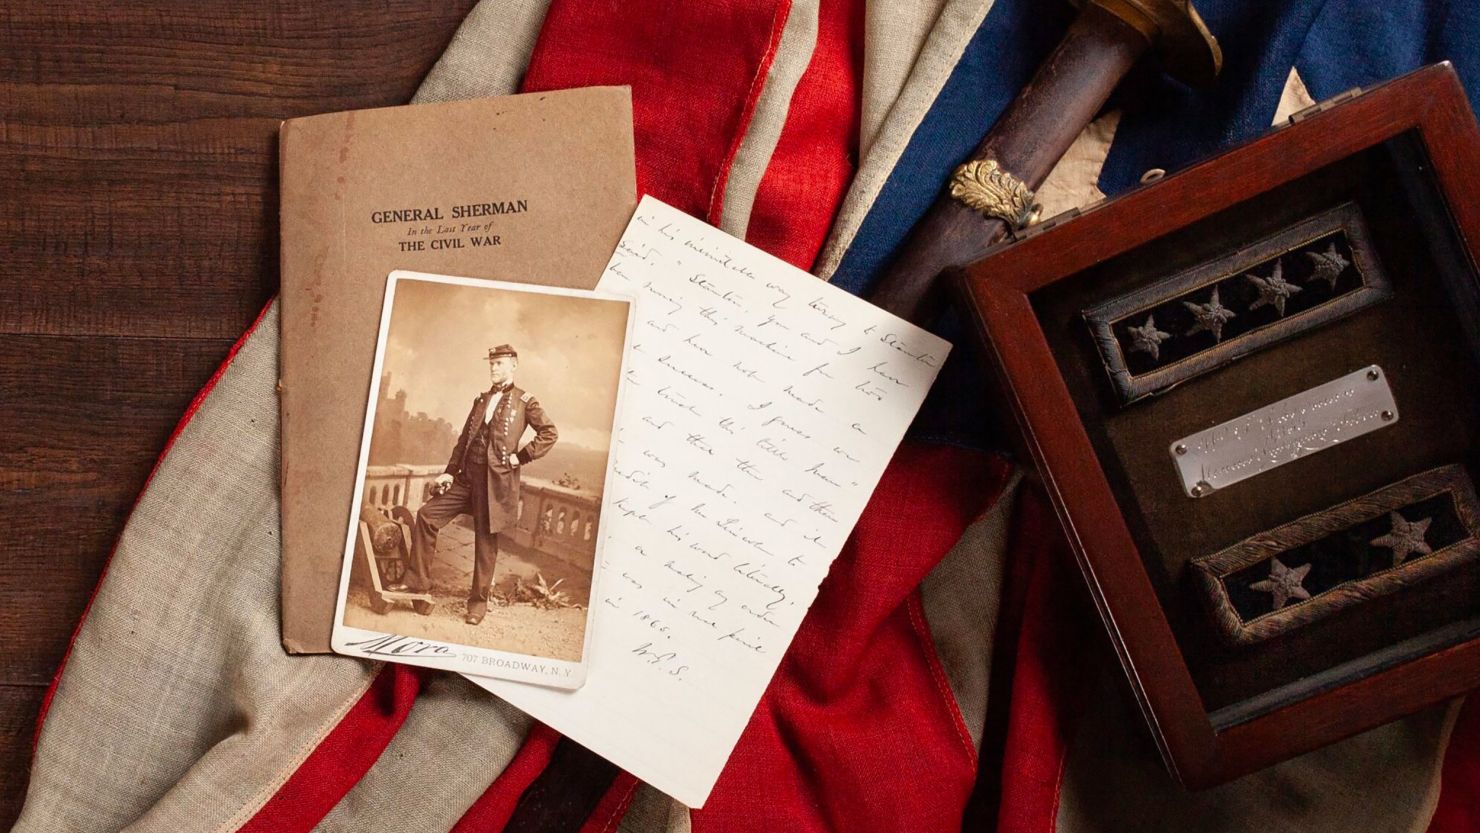 The items from William T. Sherman's family collection include his sword used in battle, rank insignia and handwritten notes by the historical figure.